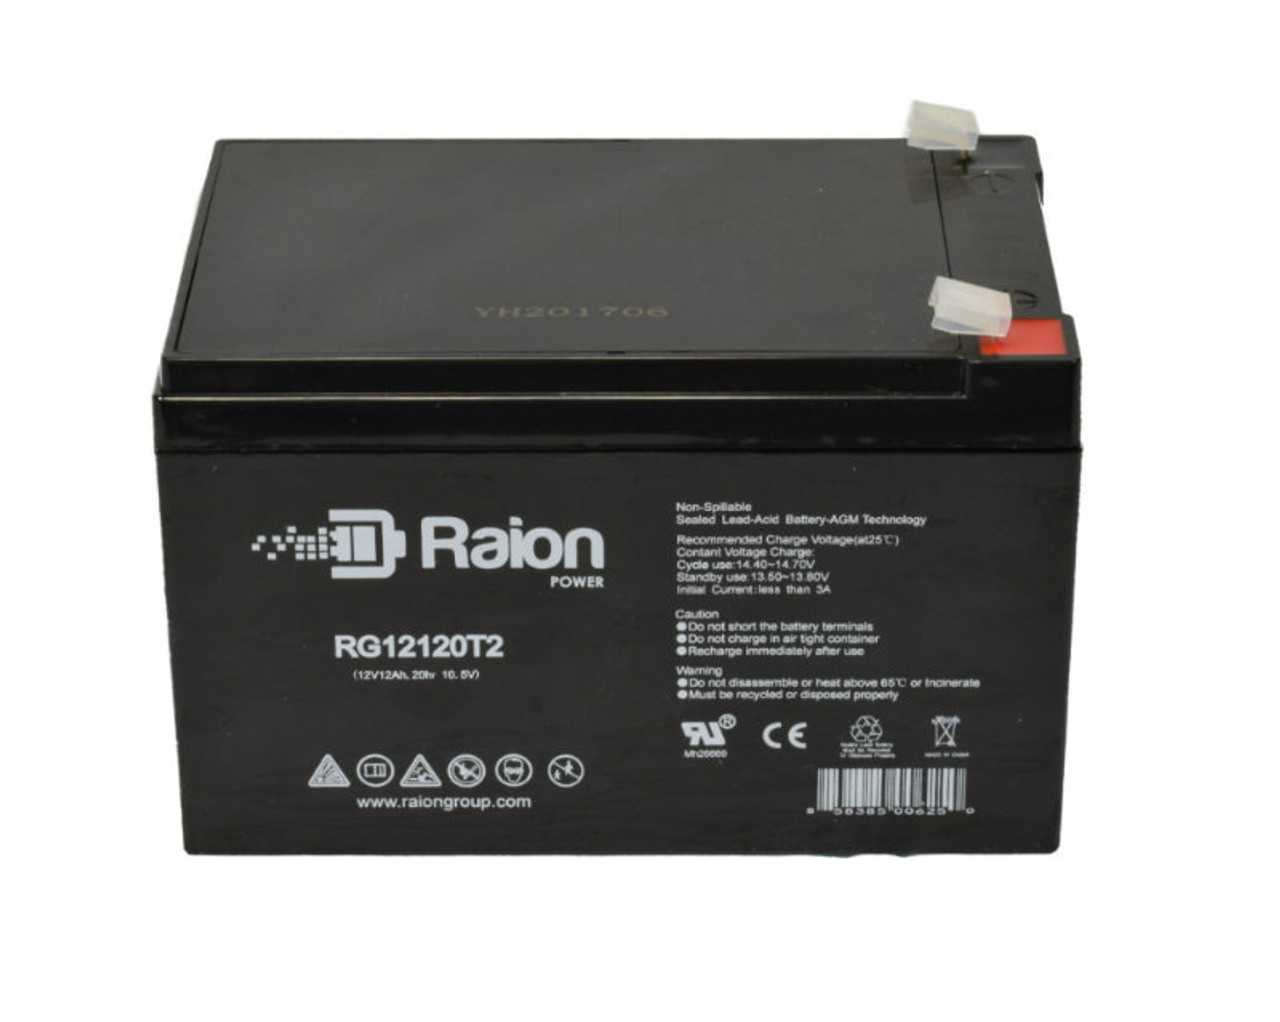 Raion Power RG12120T2 Replacement Battery Cartridge for Deltec PRC1000